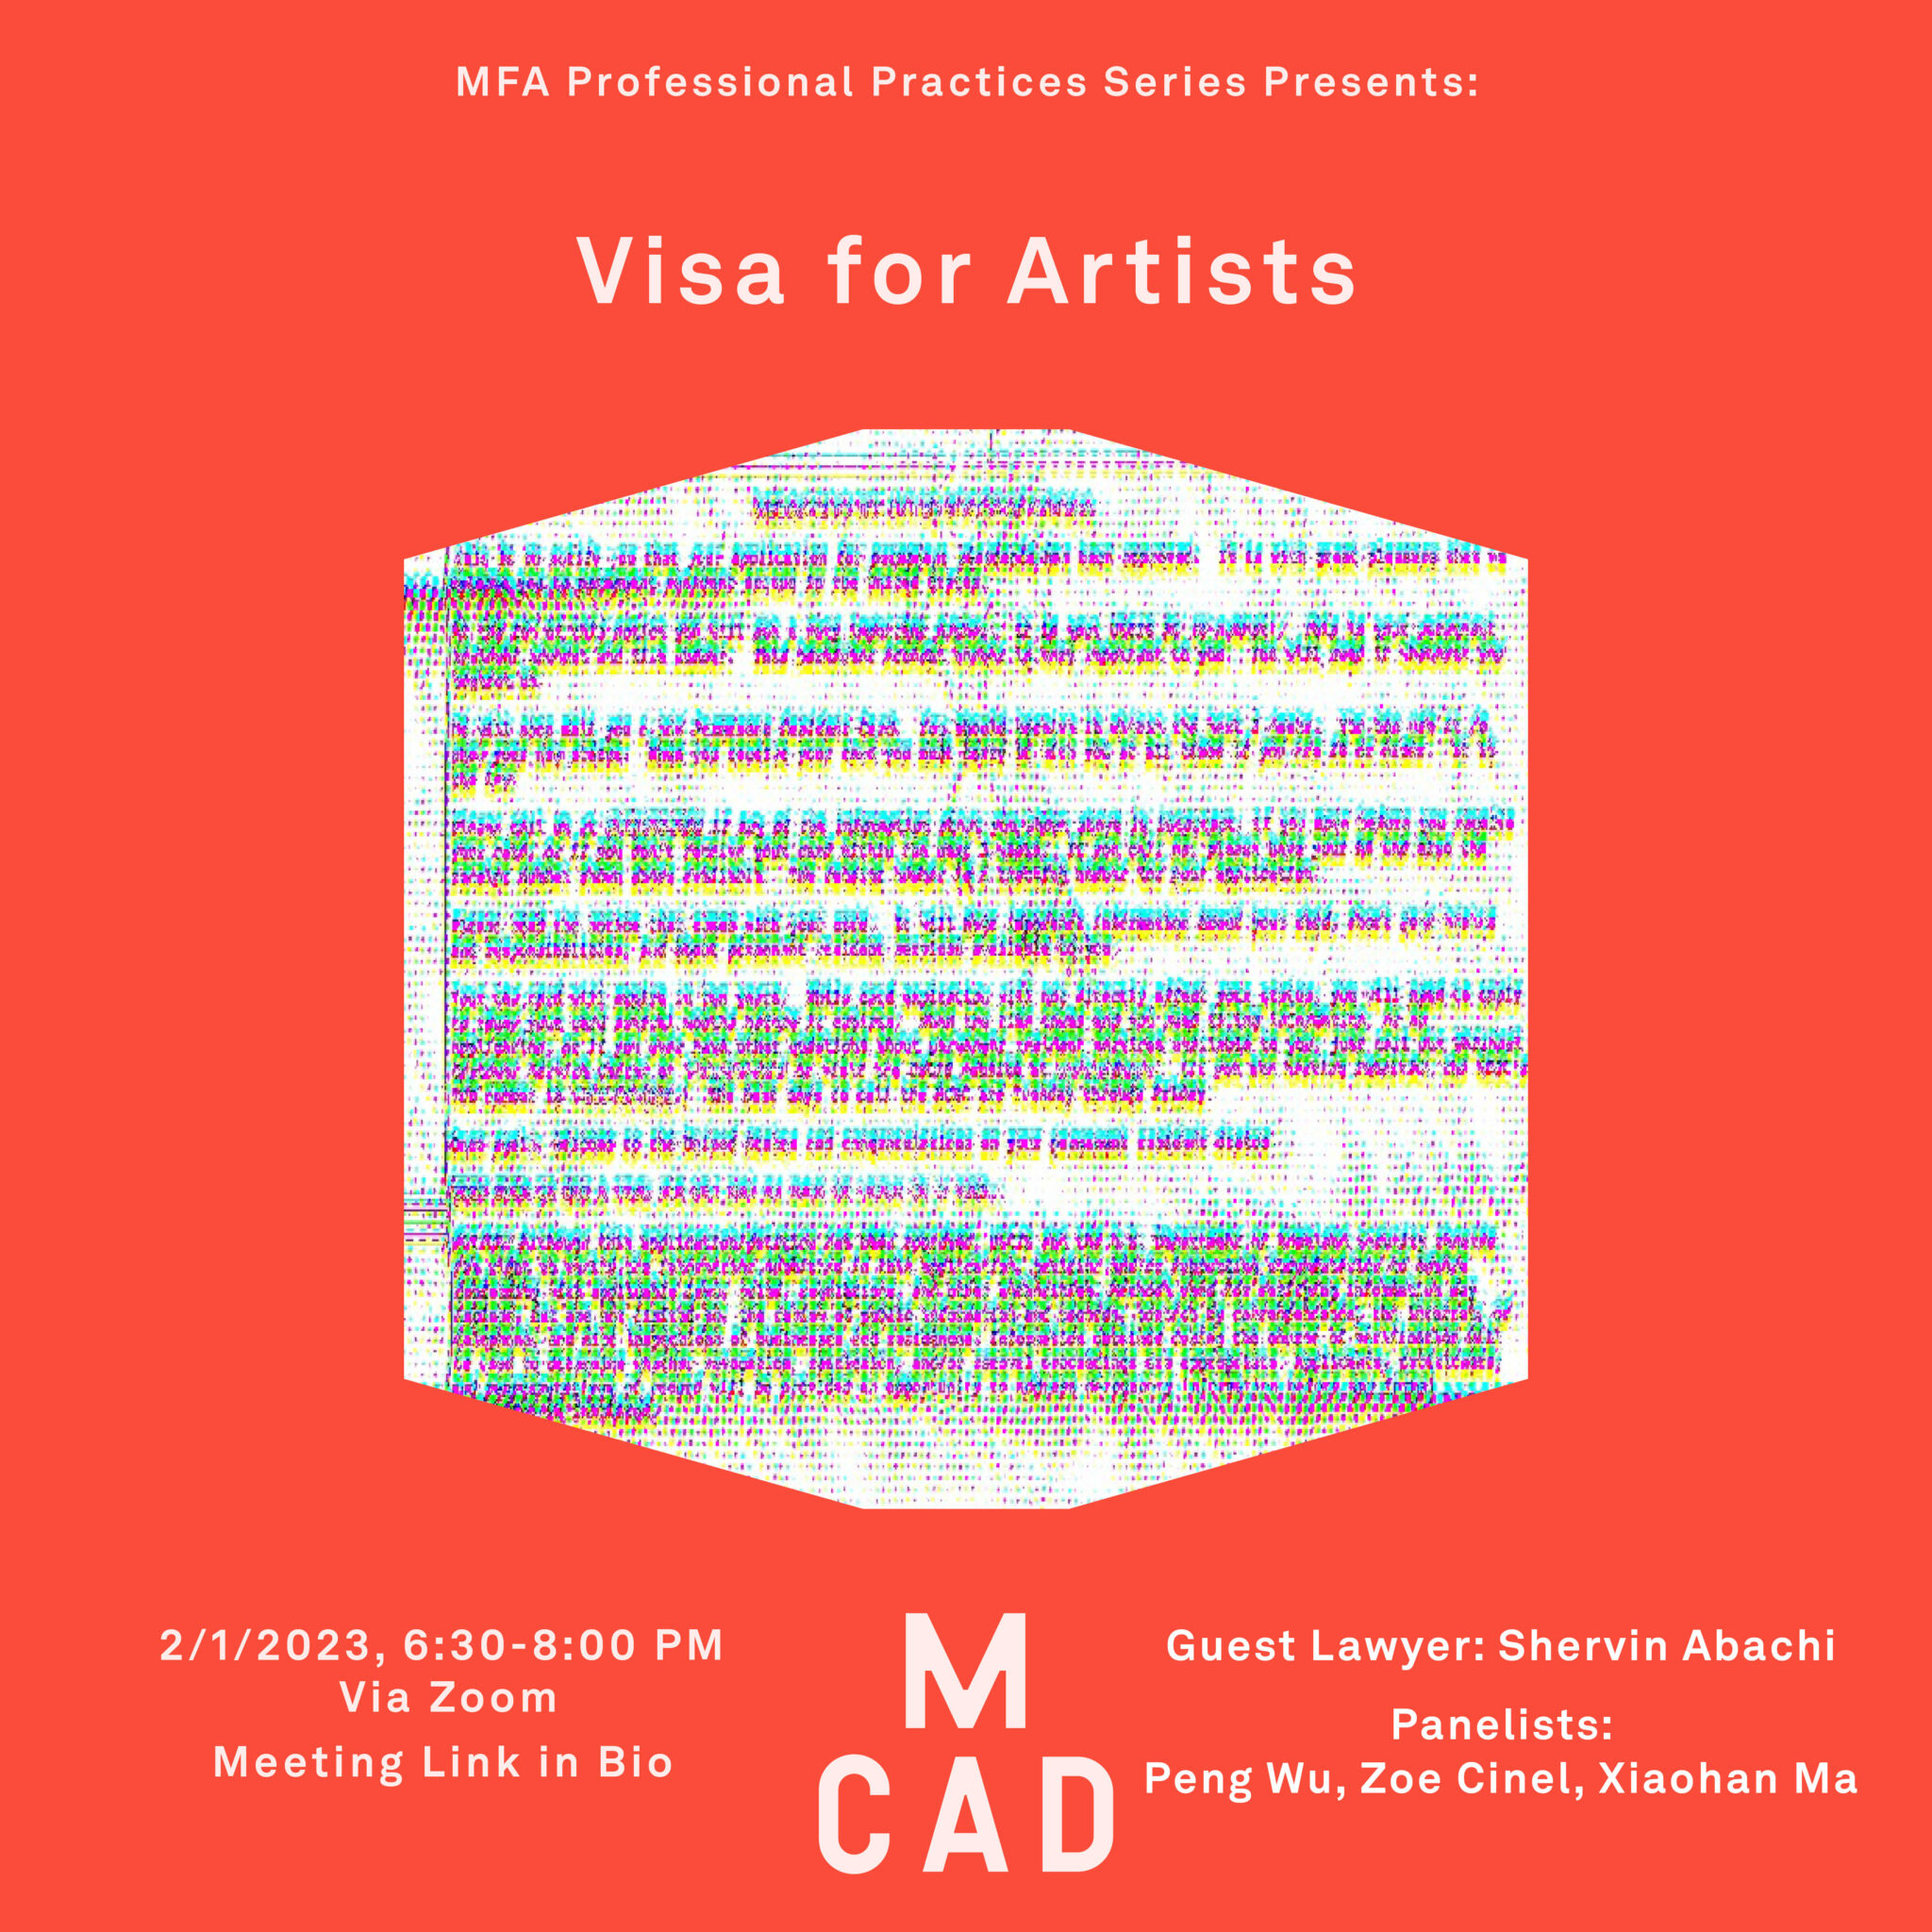 Visa for Artists - Professional Practices Series